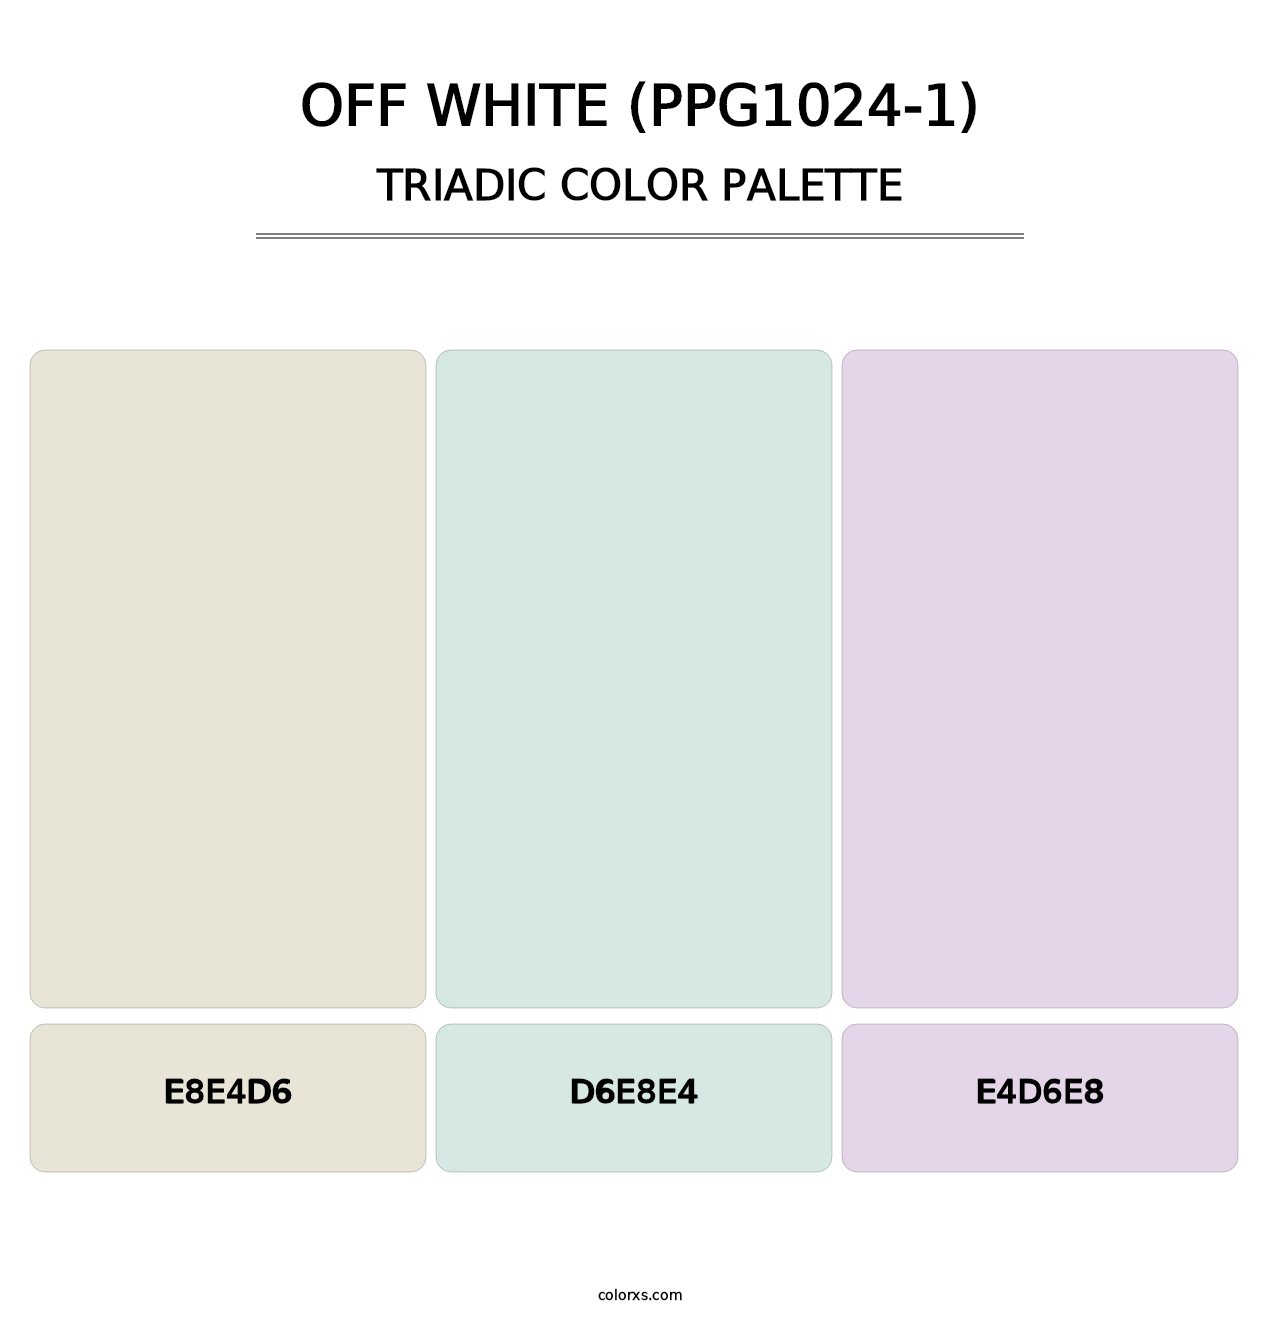 Off White (PPG1024-1) - Triadic Color Palette